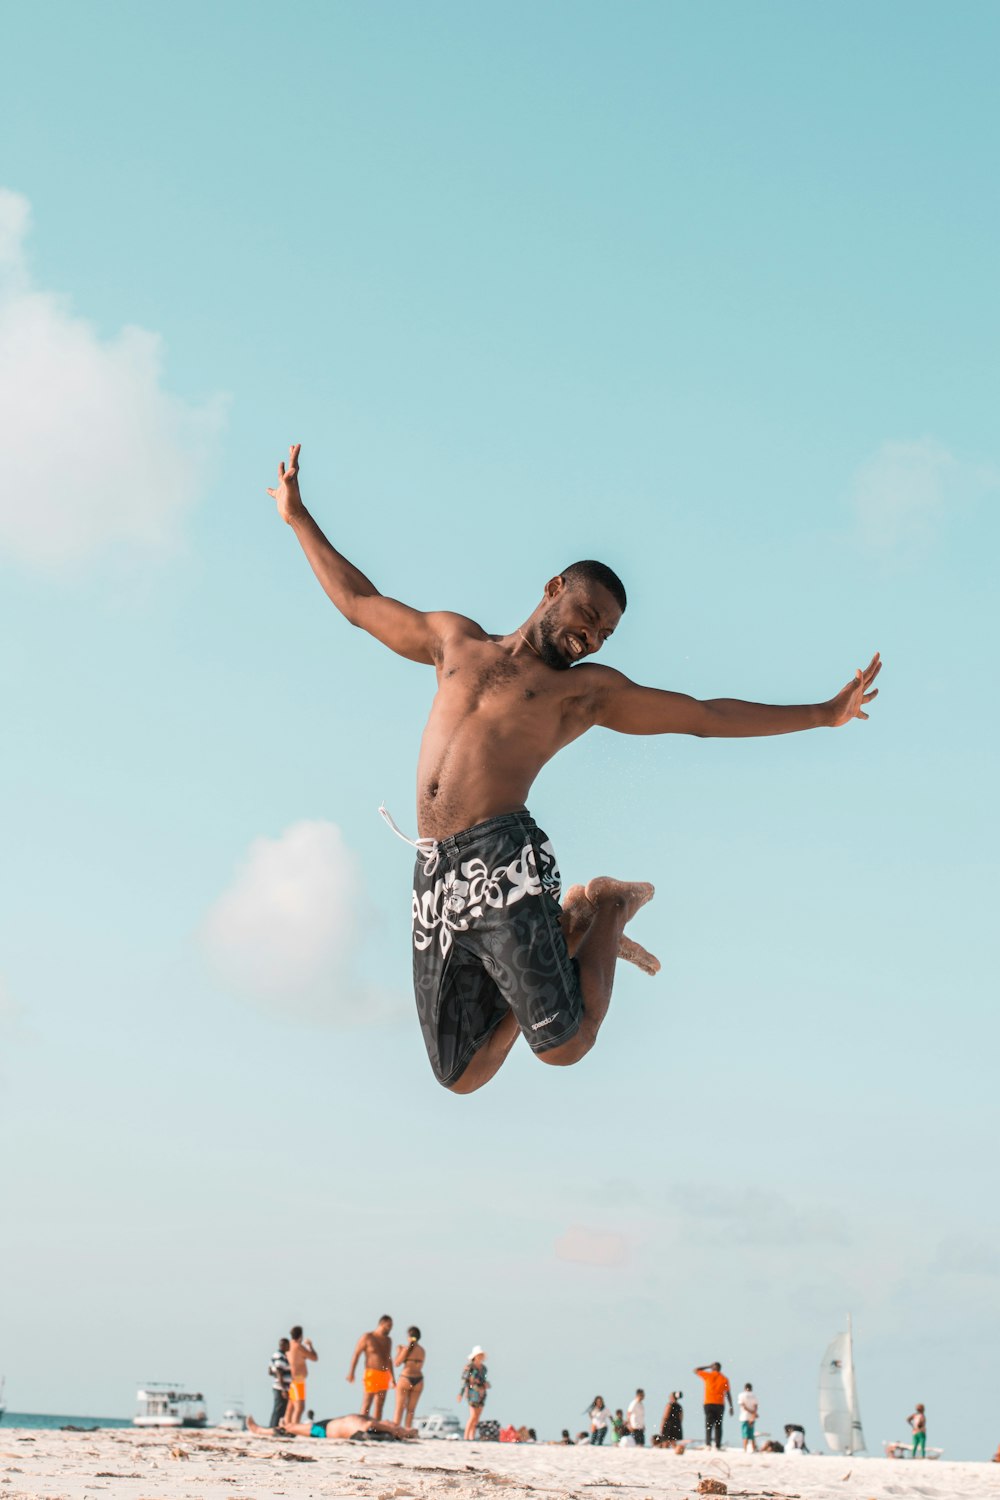 man jumping while spreading his arms and folding his legs at the beach during day